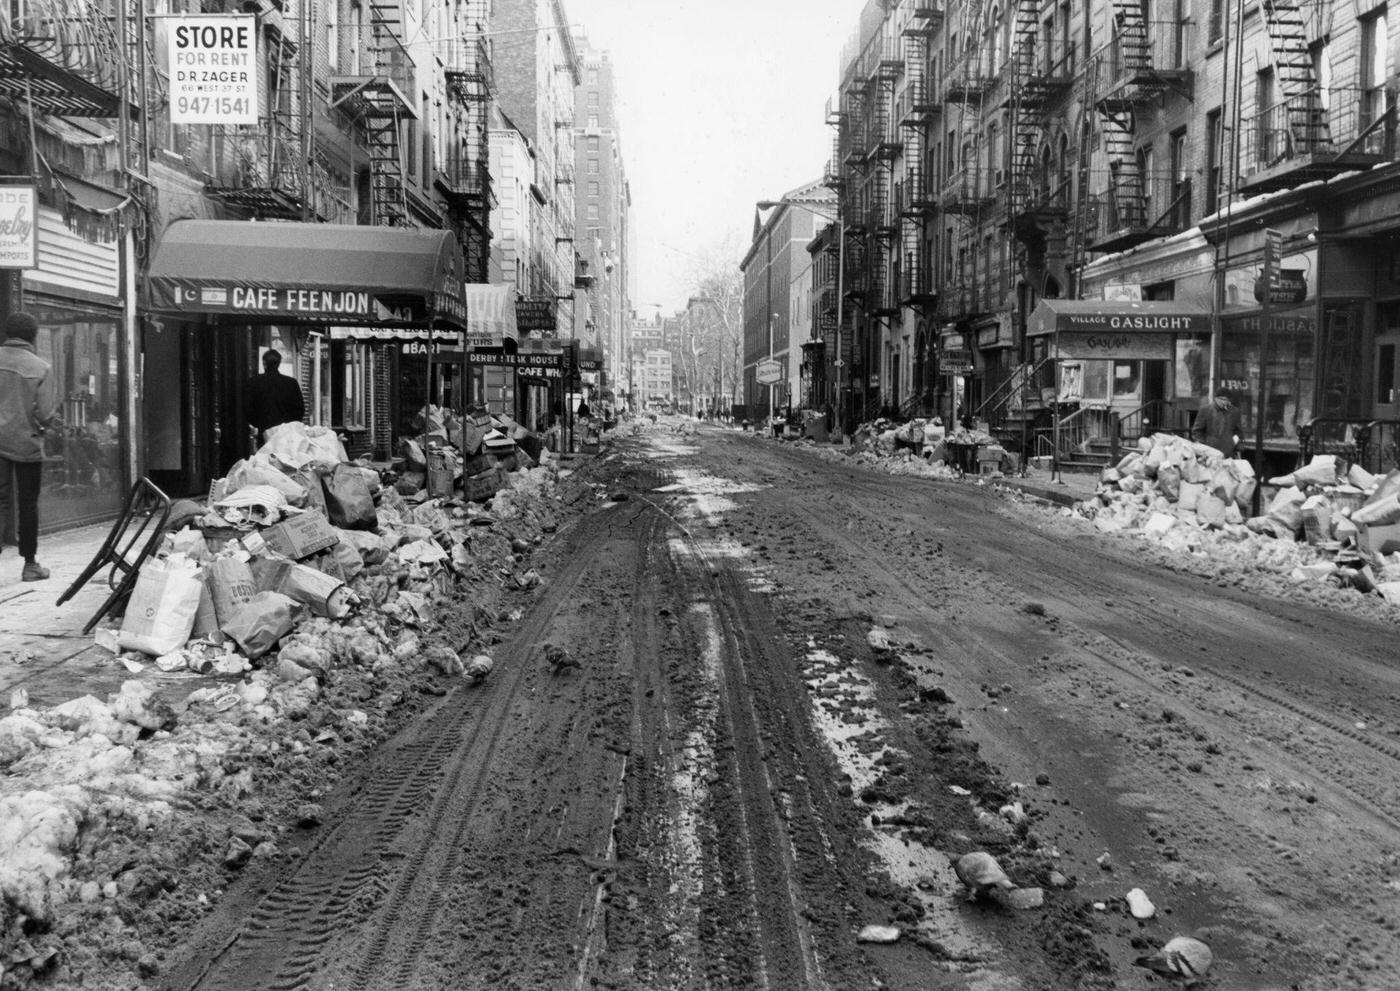 View Of Trash And Snow Piled Along Macdougal Street In Greenwich Village After A Blizzard, Manhattan, 1969